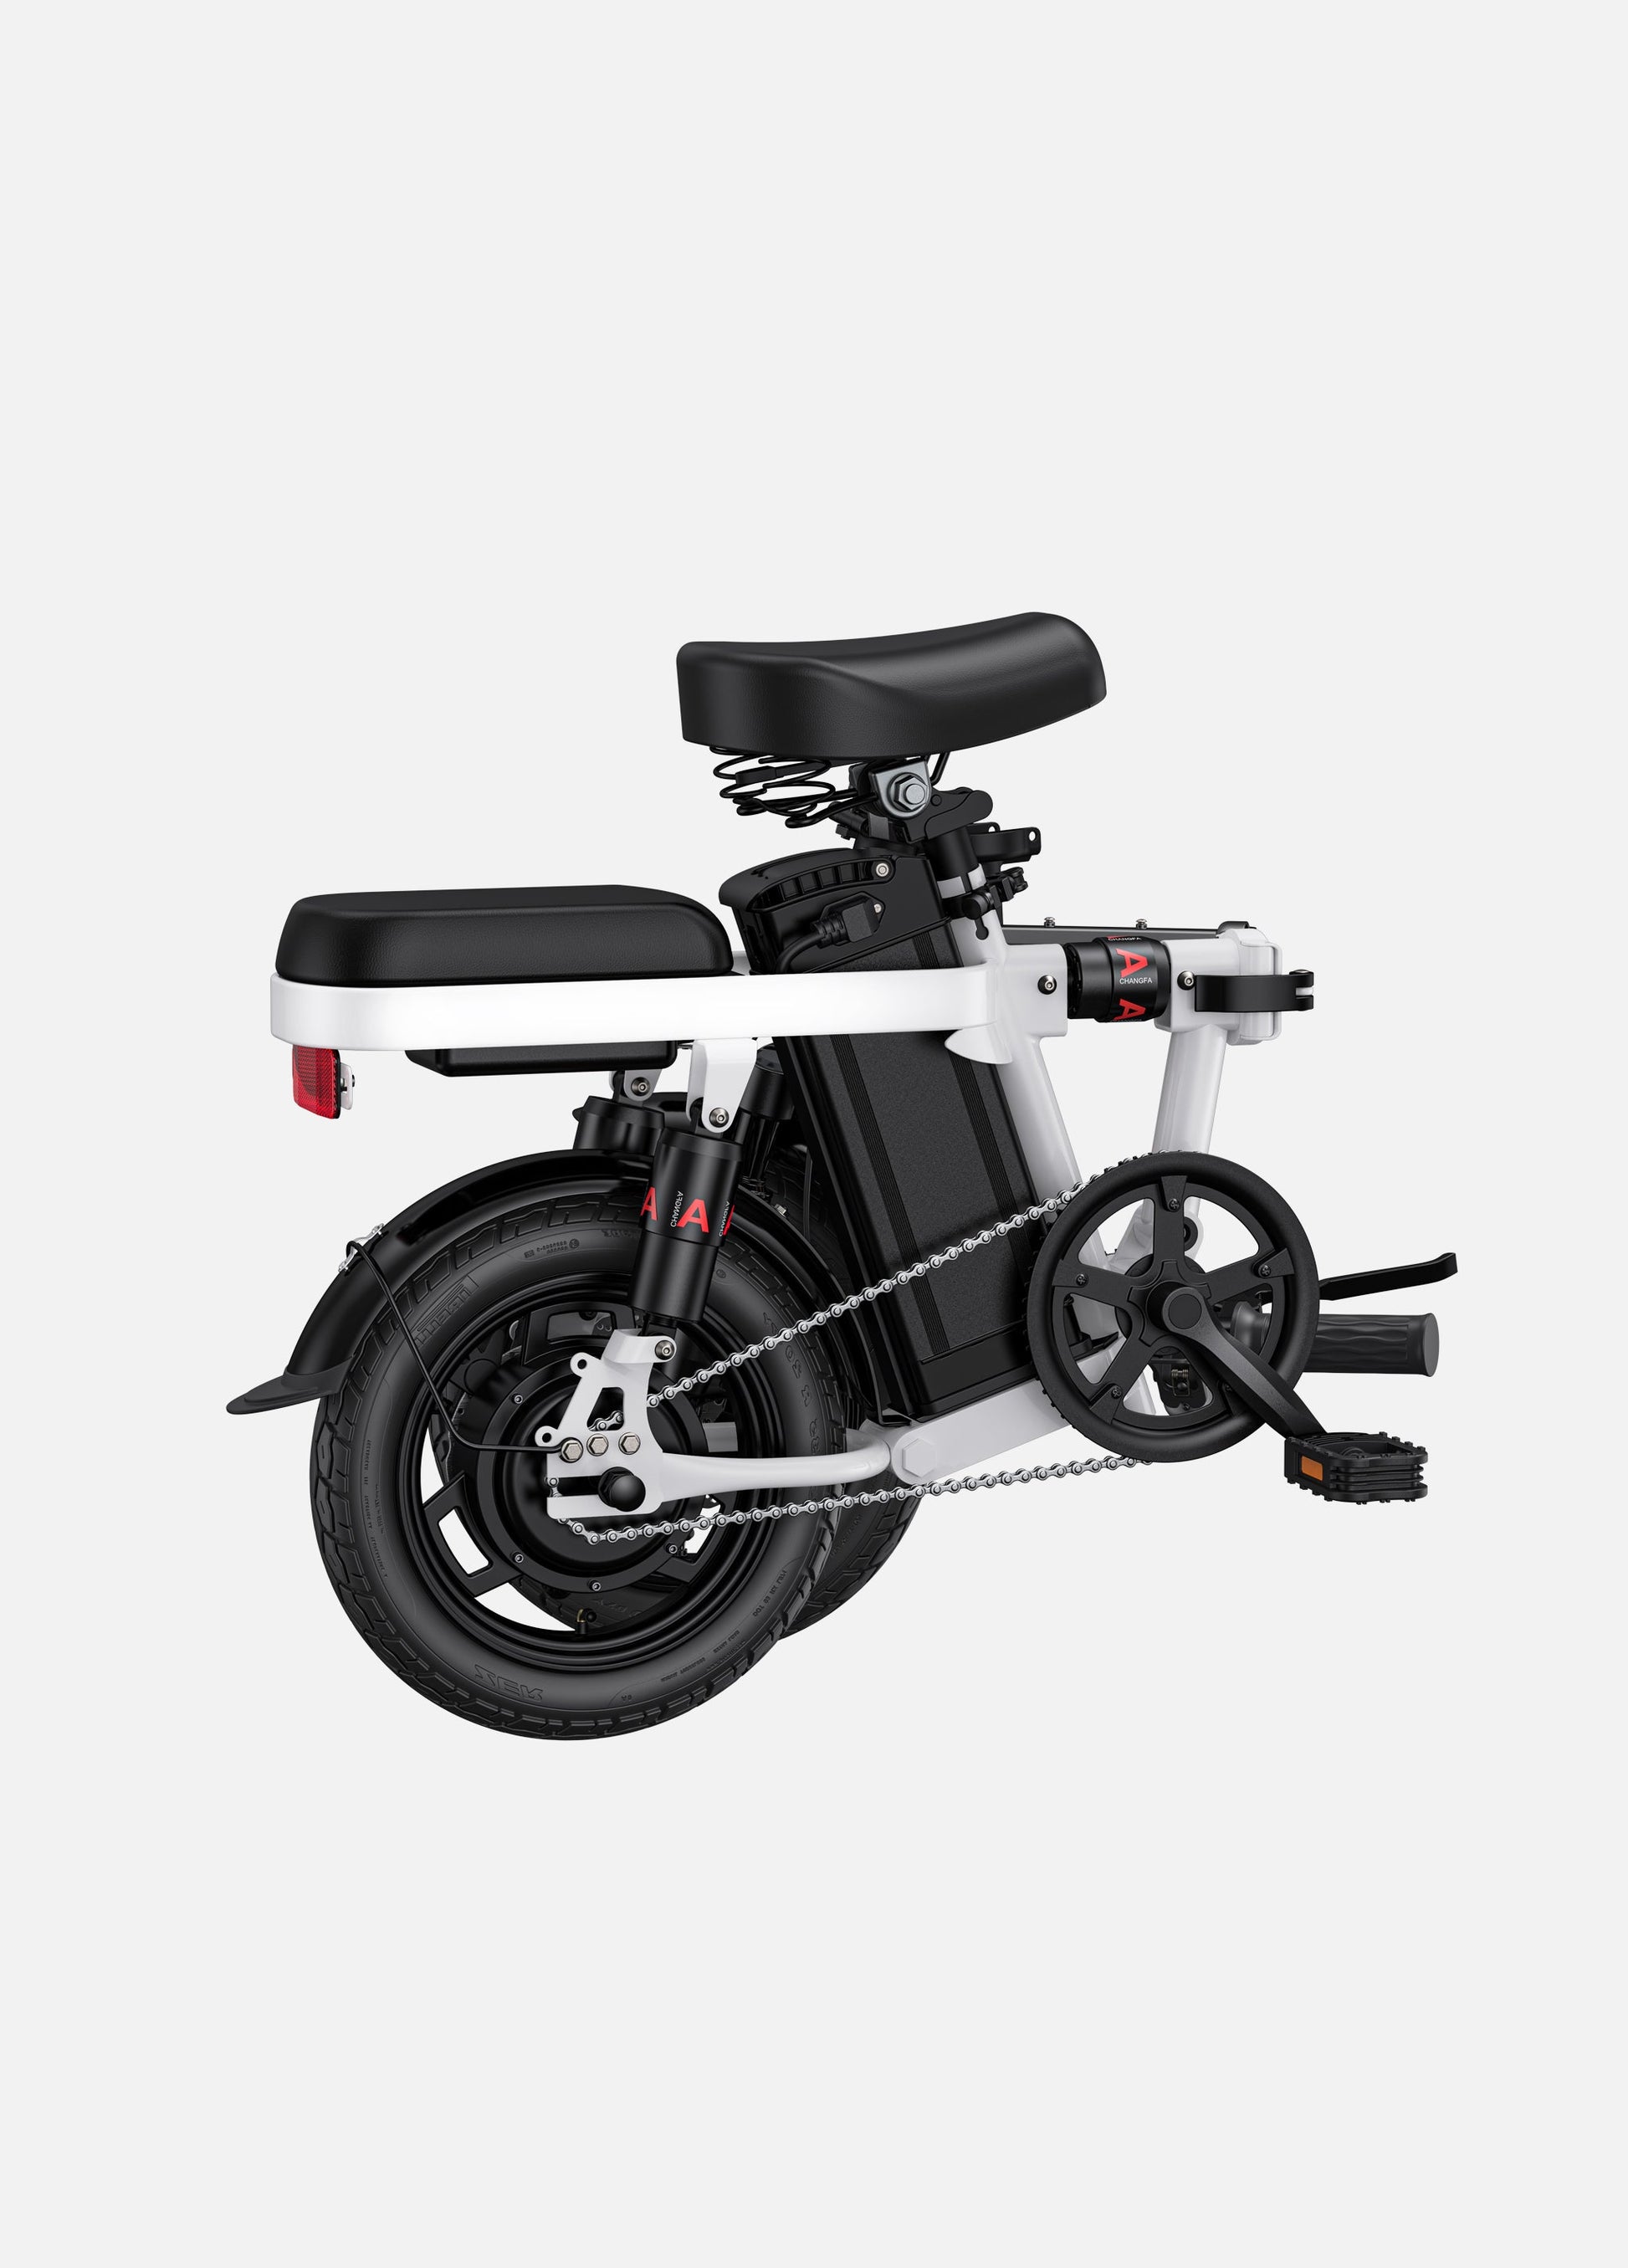 Detailed view of Engwe T14 electric bike's rear with red taillight and suspension, emphasizing its safety and comfort features.